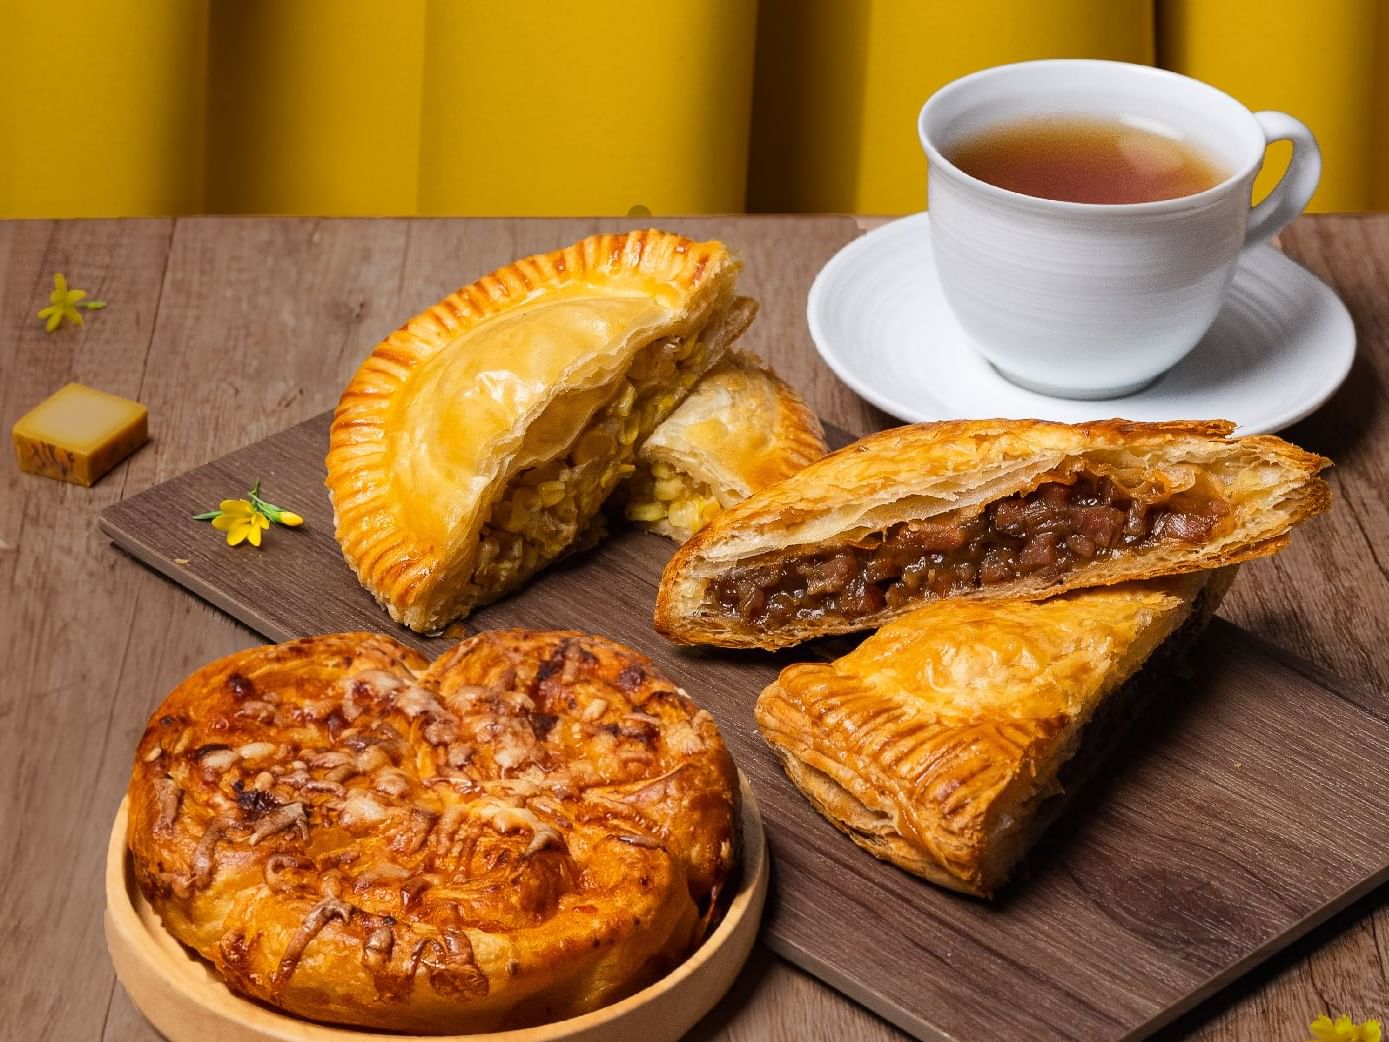 A tray of delicious pastries accompanied by a steaming cup of tea. A delightful treat for any time of the day.